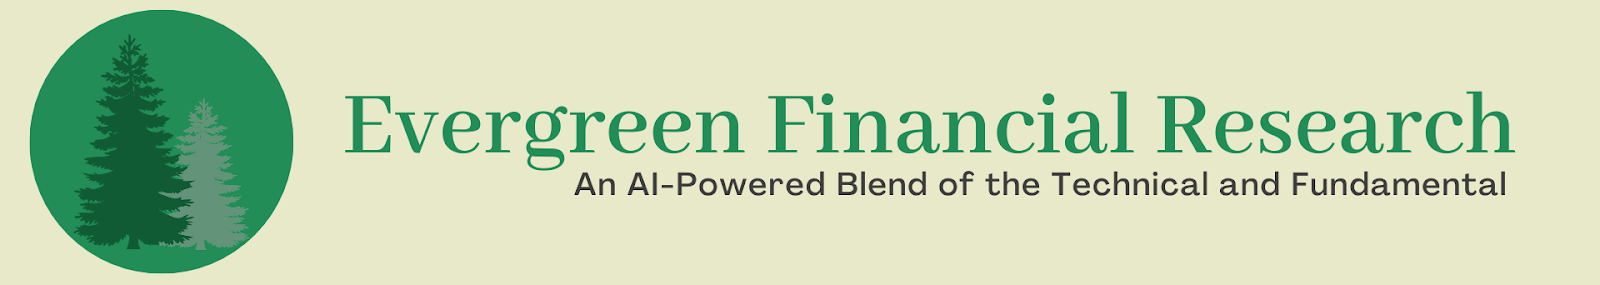 Evergreen Financial Research